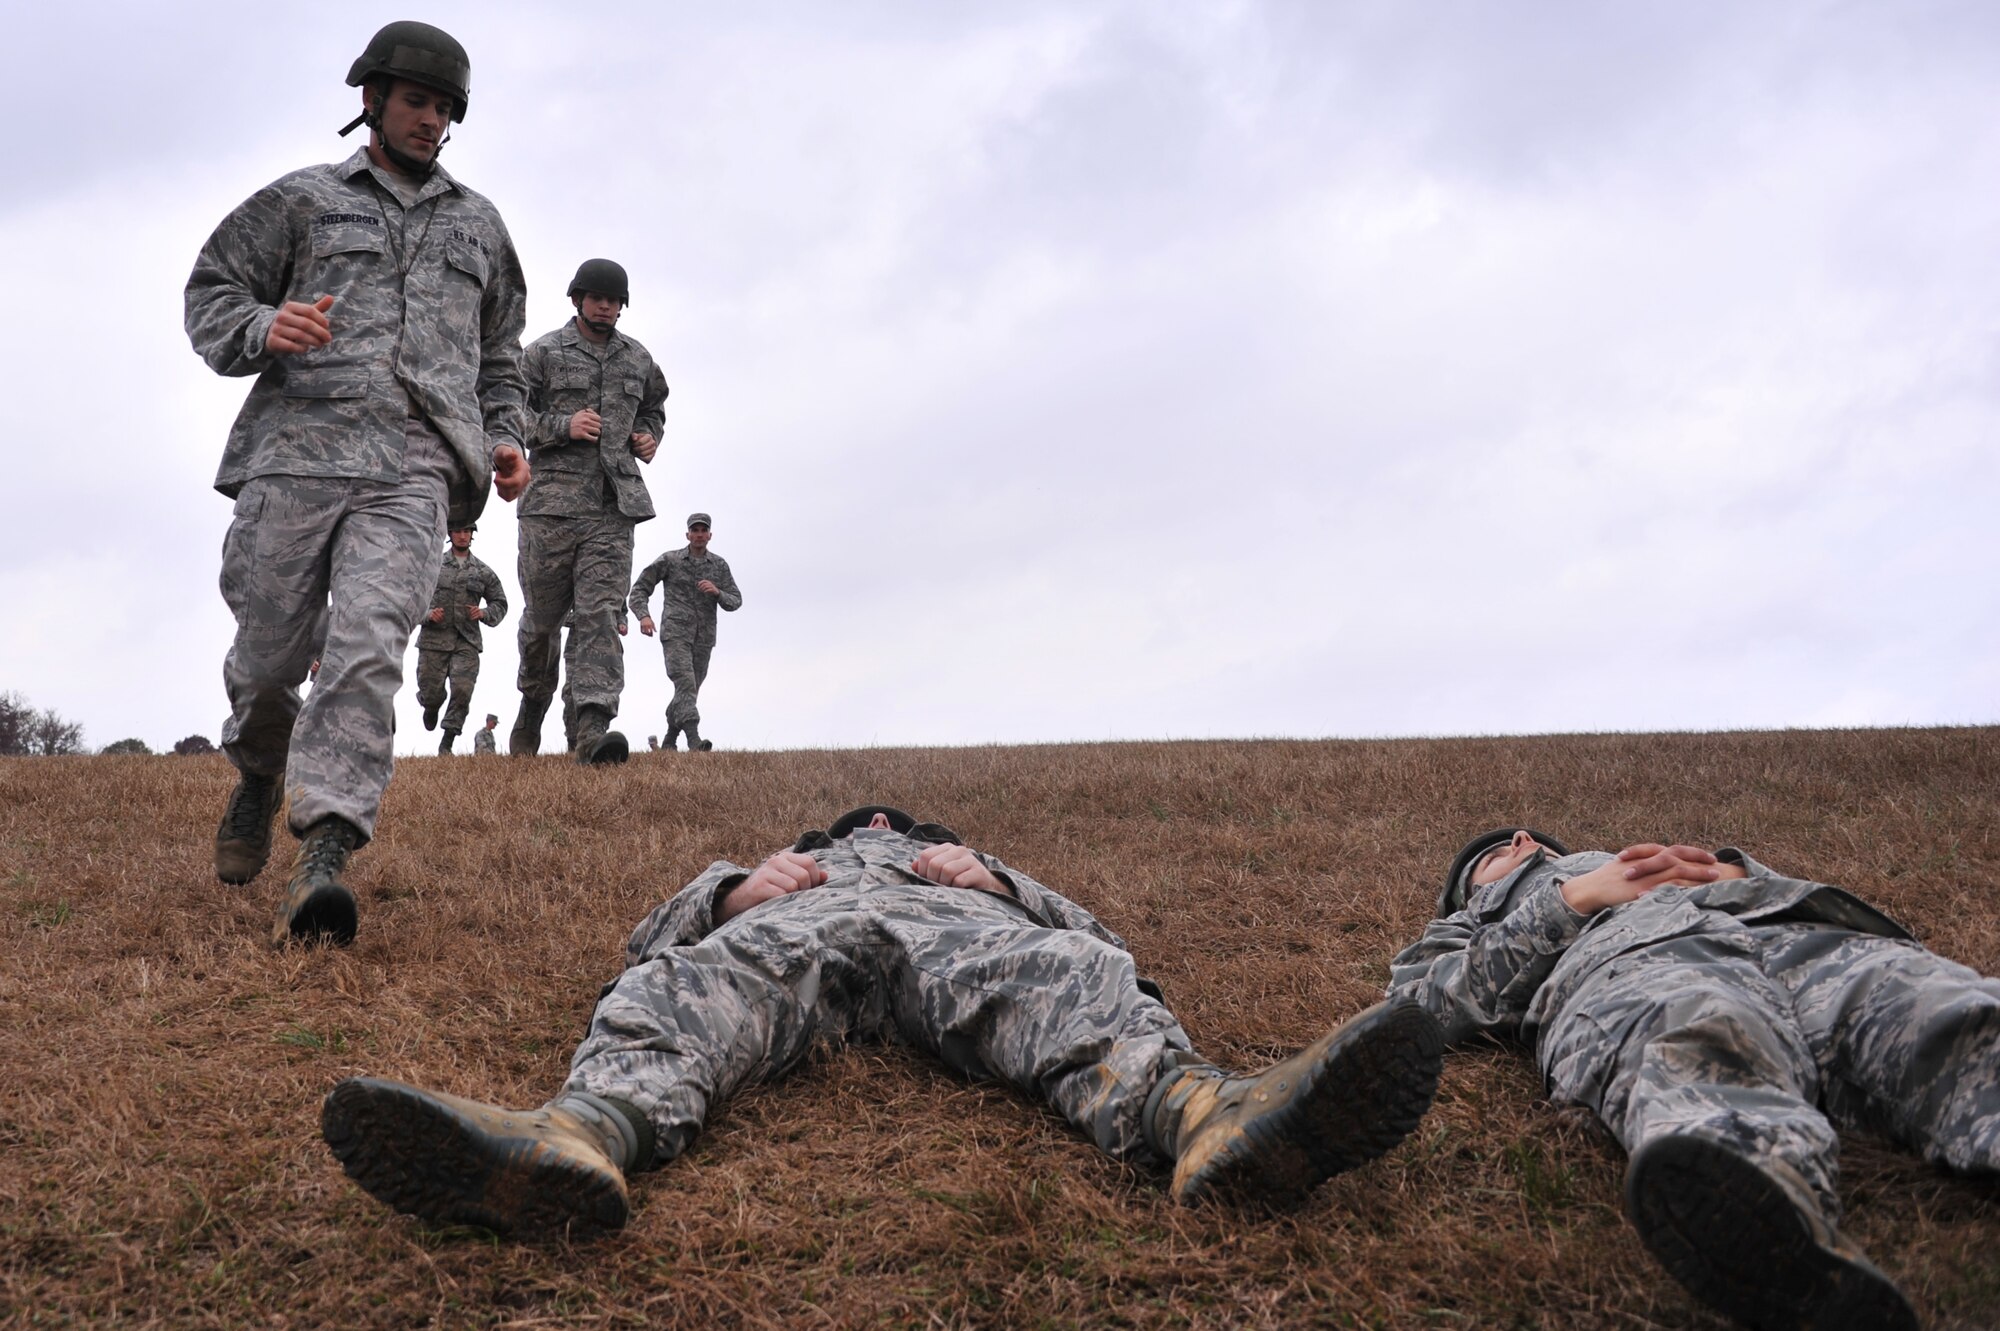 Class 14-03 officer trainees rush carry to mock-injured team members to safety during the basic expeditionary leadership problem solving course Dec. 4, 2013, at Maxwell Air Force Base, Ala. During this course the officer candidates are each tasked to take lead in solving a problem they would possibly run into in a situation in the operational Air Force. The trainees must complete each exercise within 20 minutes. (U.S. Air Force photo by Staff Sgt. Natasha Stannard)